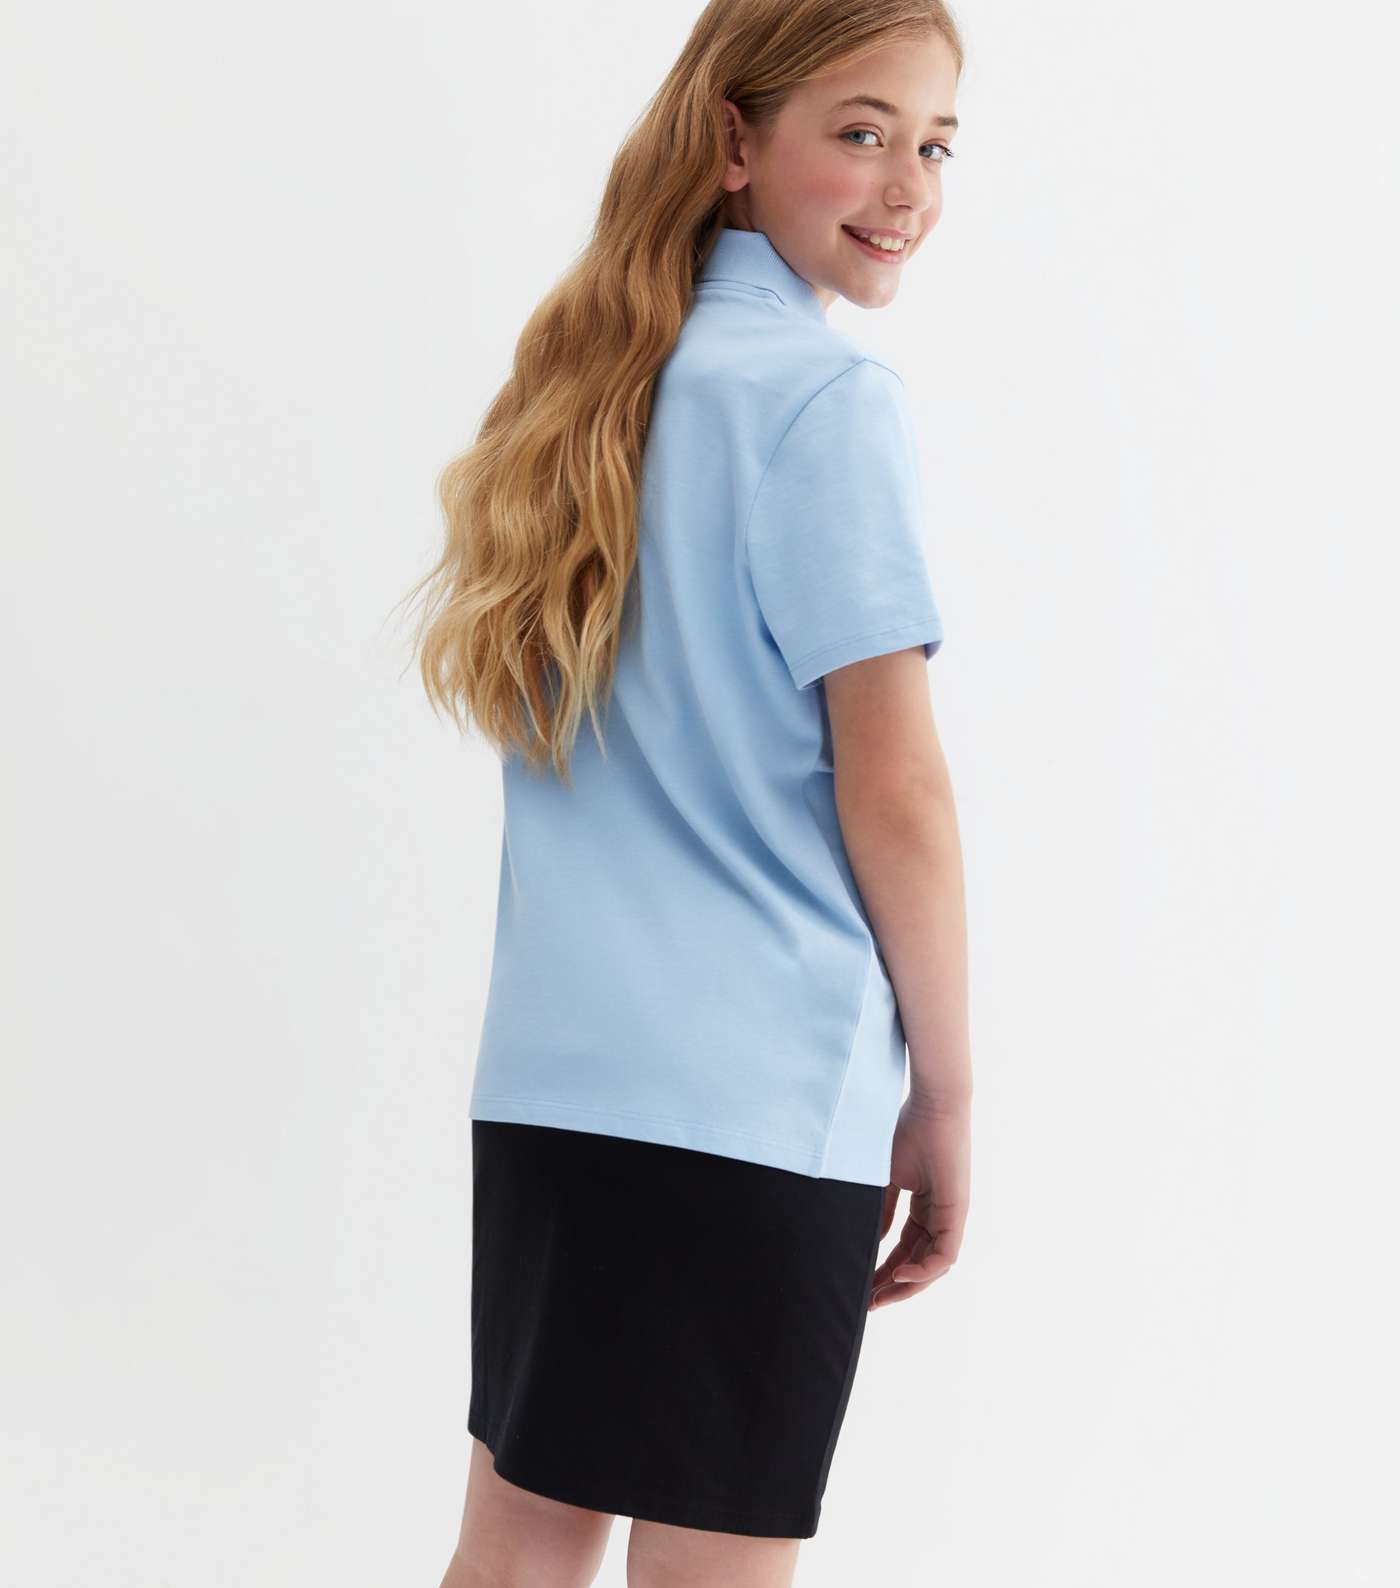 Girls Pale Blue Collared Short Sleeve School Polo Shirt Image 4